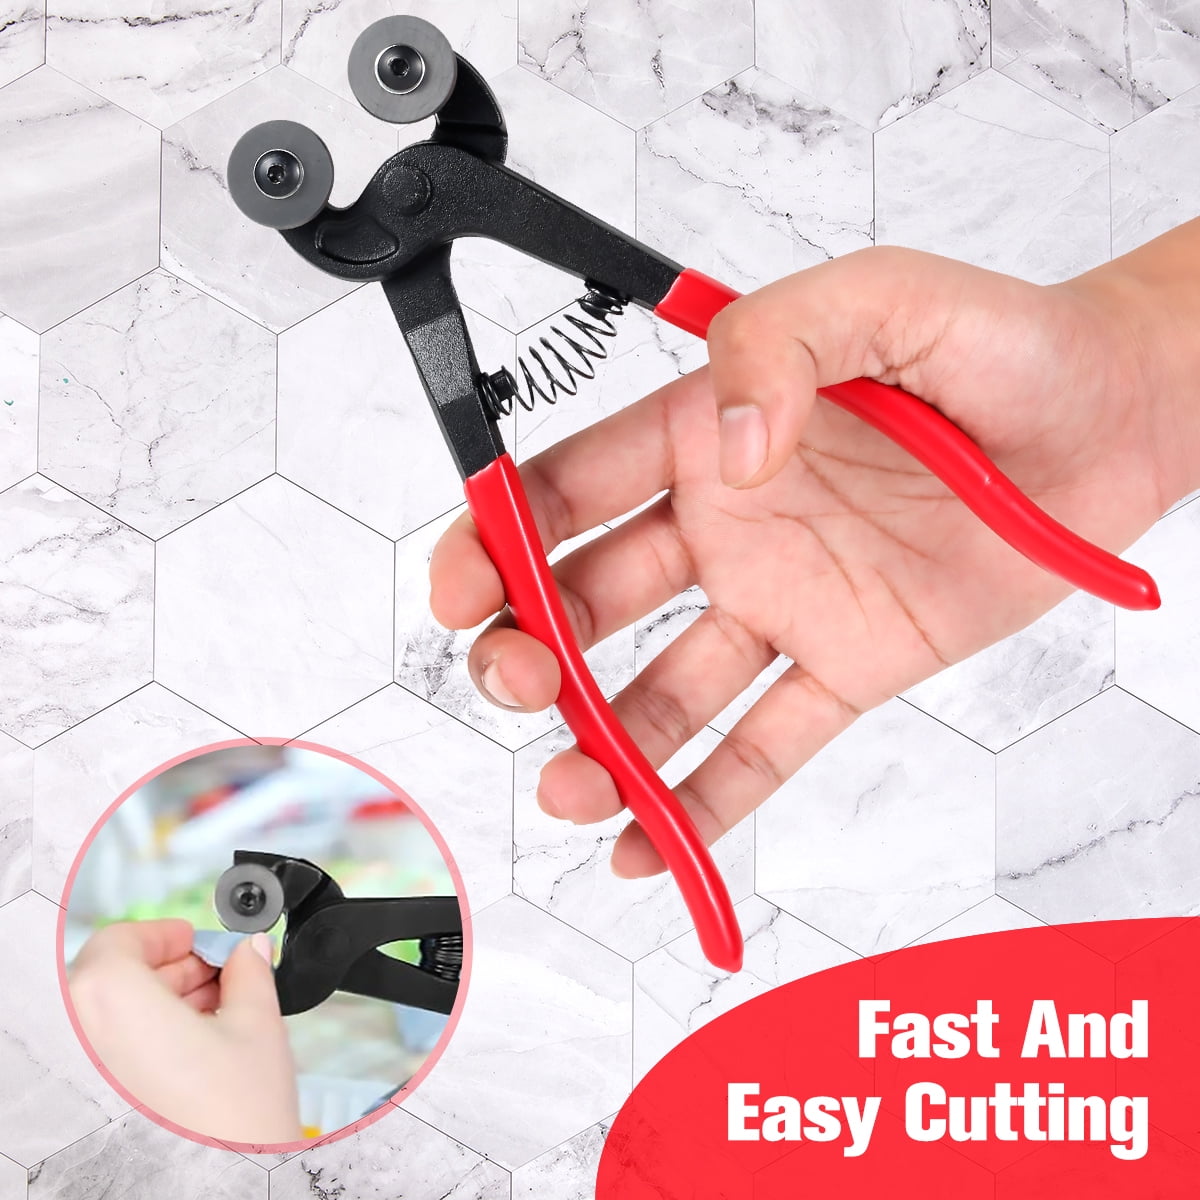 SPEEDWOX 8 Mosaic Nippers, Mosaic Tile Cutter, Ceramic Tile Nippers Mosaic Tools, Glass Tile Cutting Pliers with Strong Plastic Breaker Bar Scoring